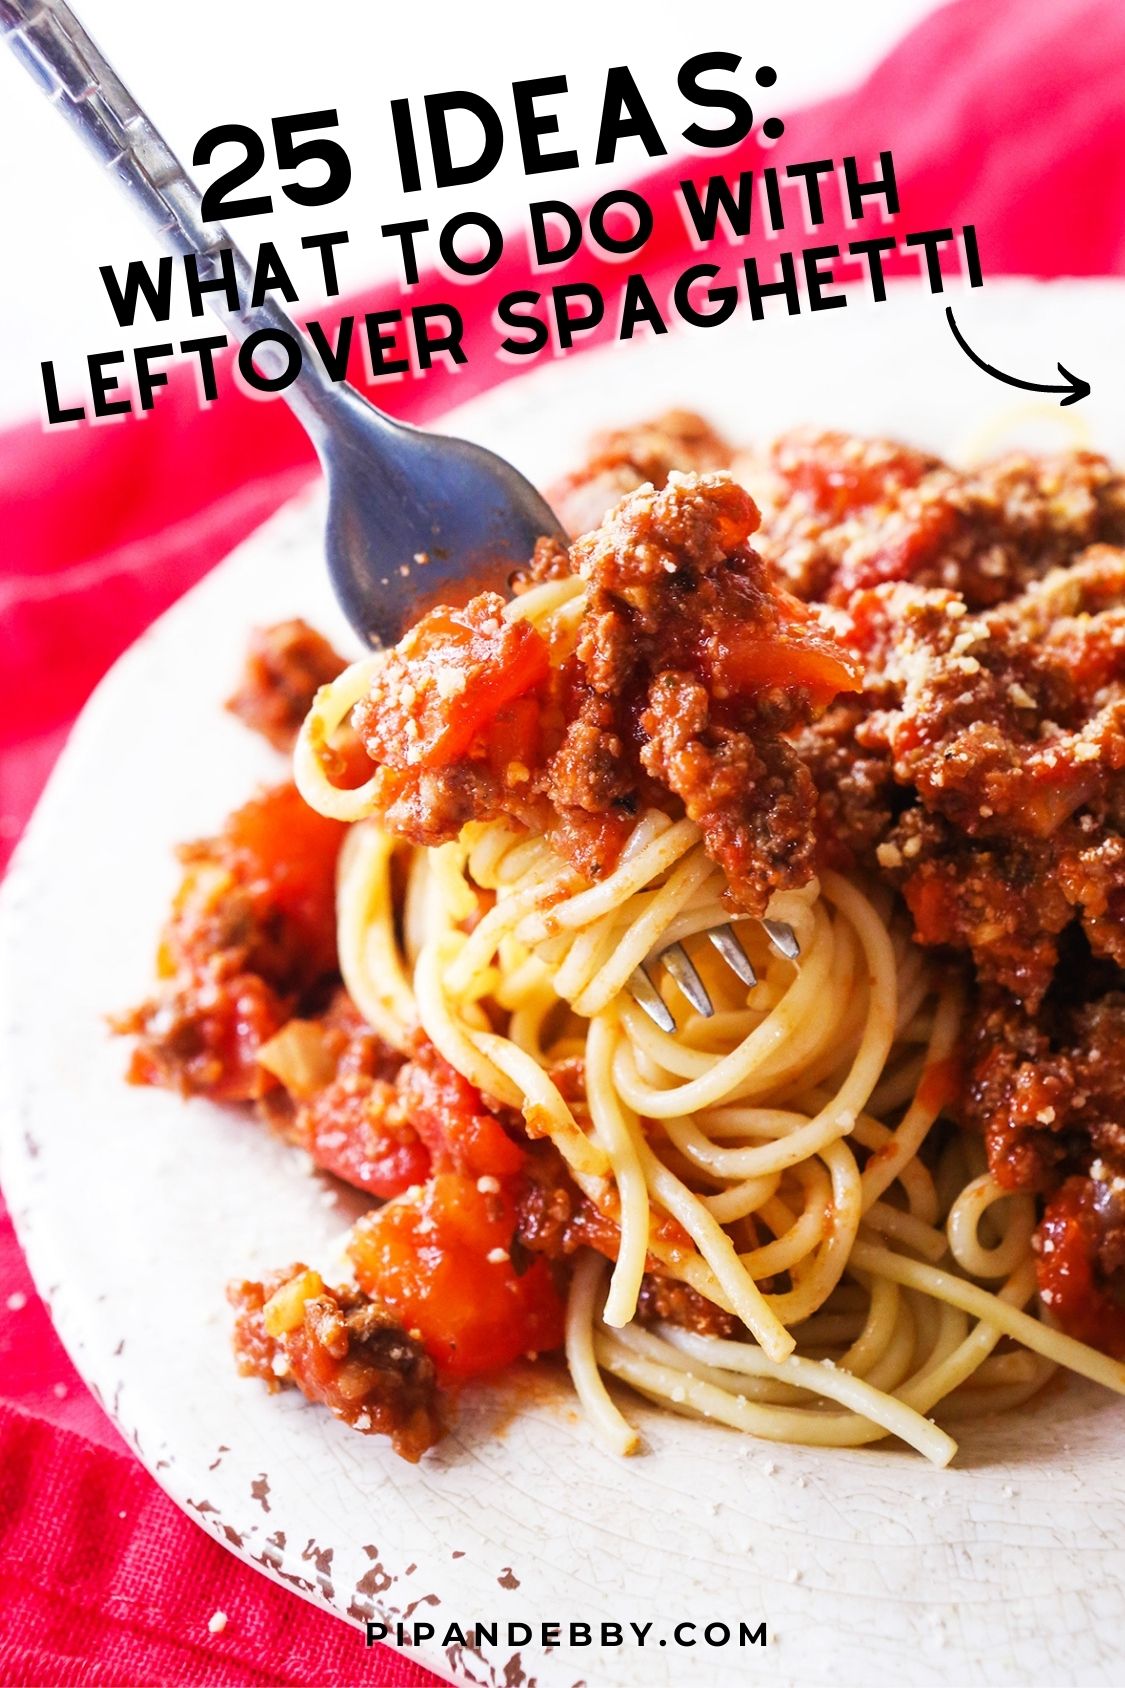 A plate of spaghetti with fork being stuck into it and text overlay reading, "25 ideas: what to do with leftover spaghetti."